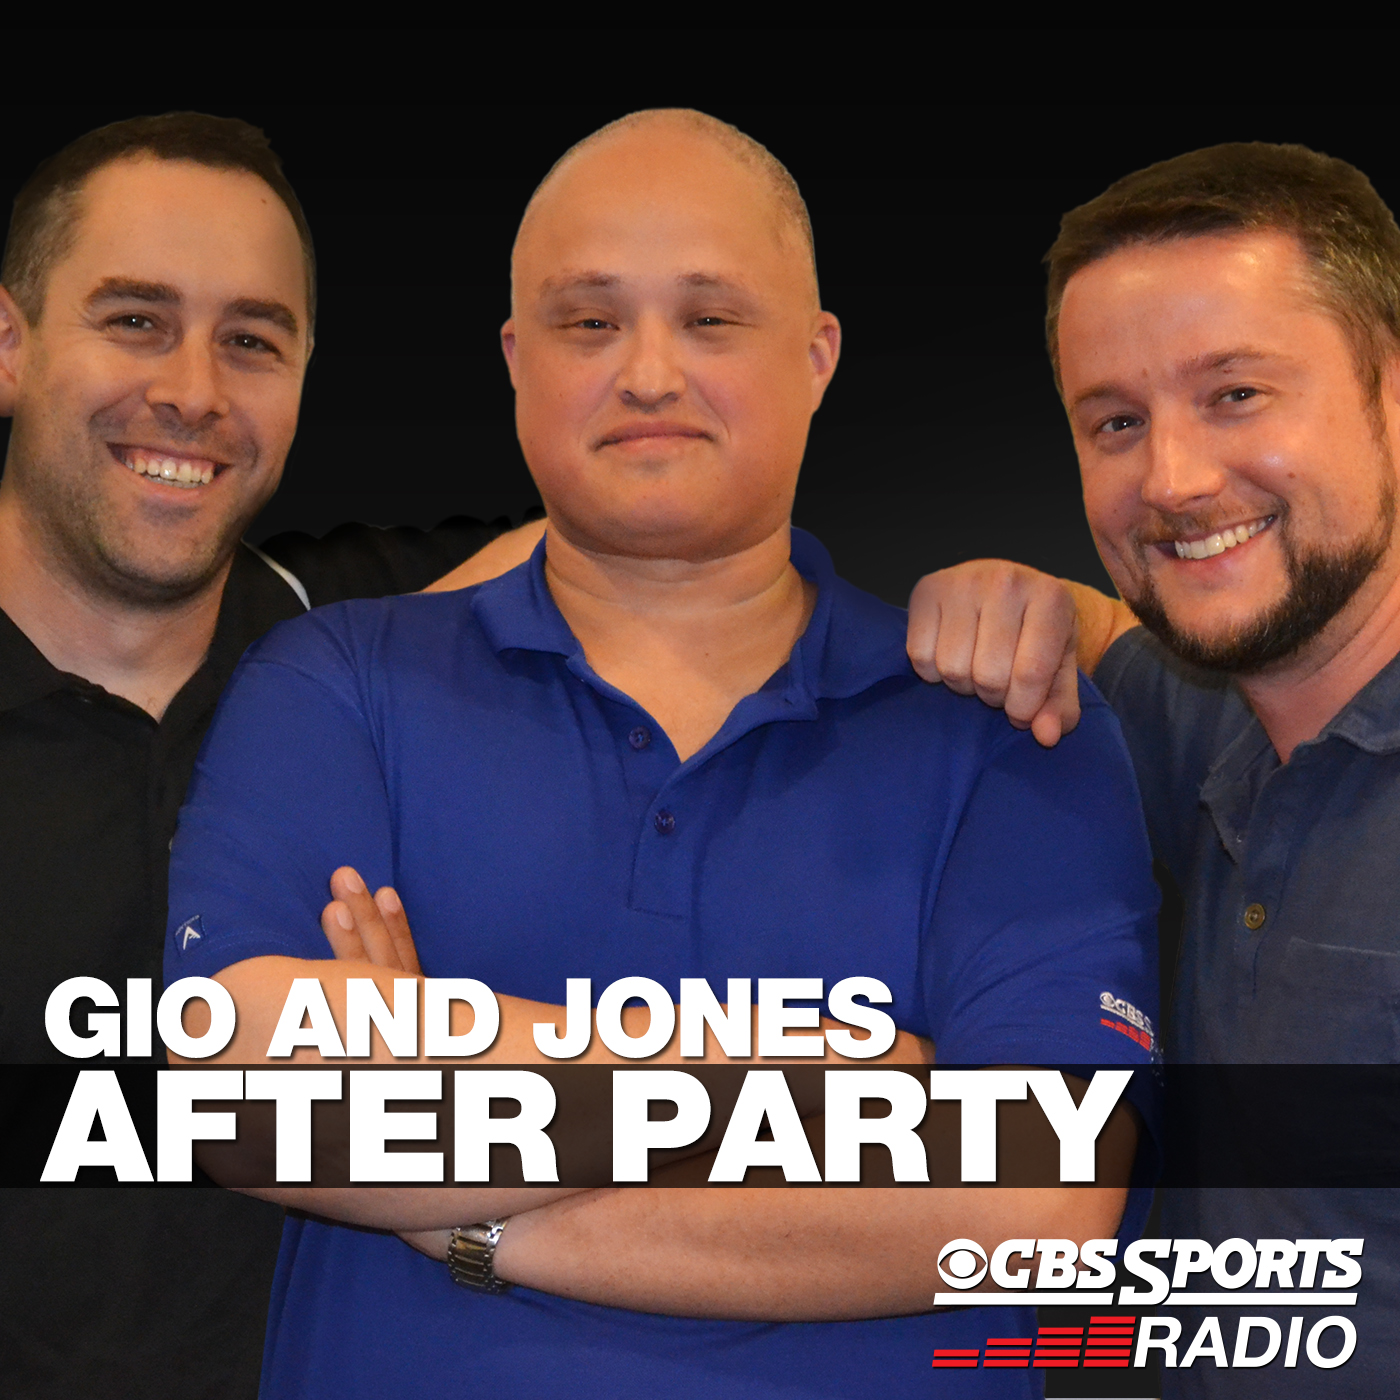 The Gio and Jones After Party